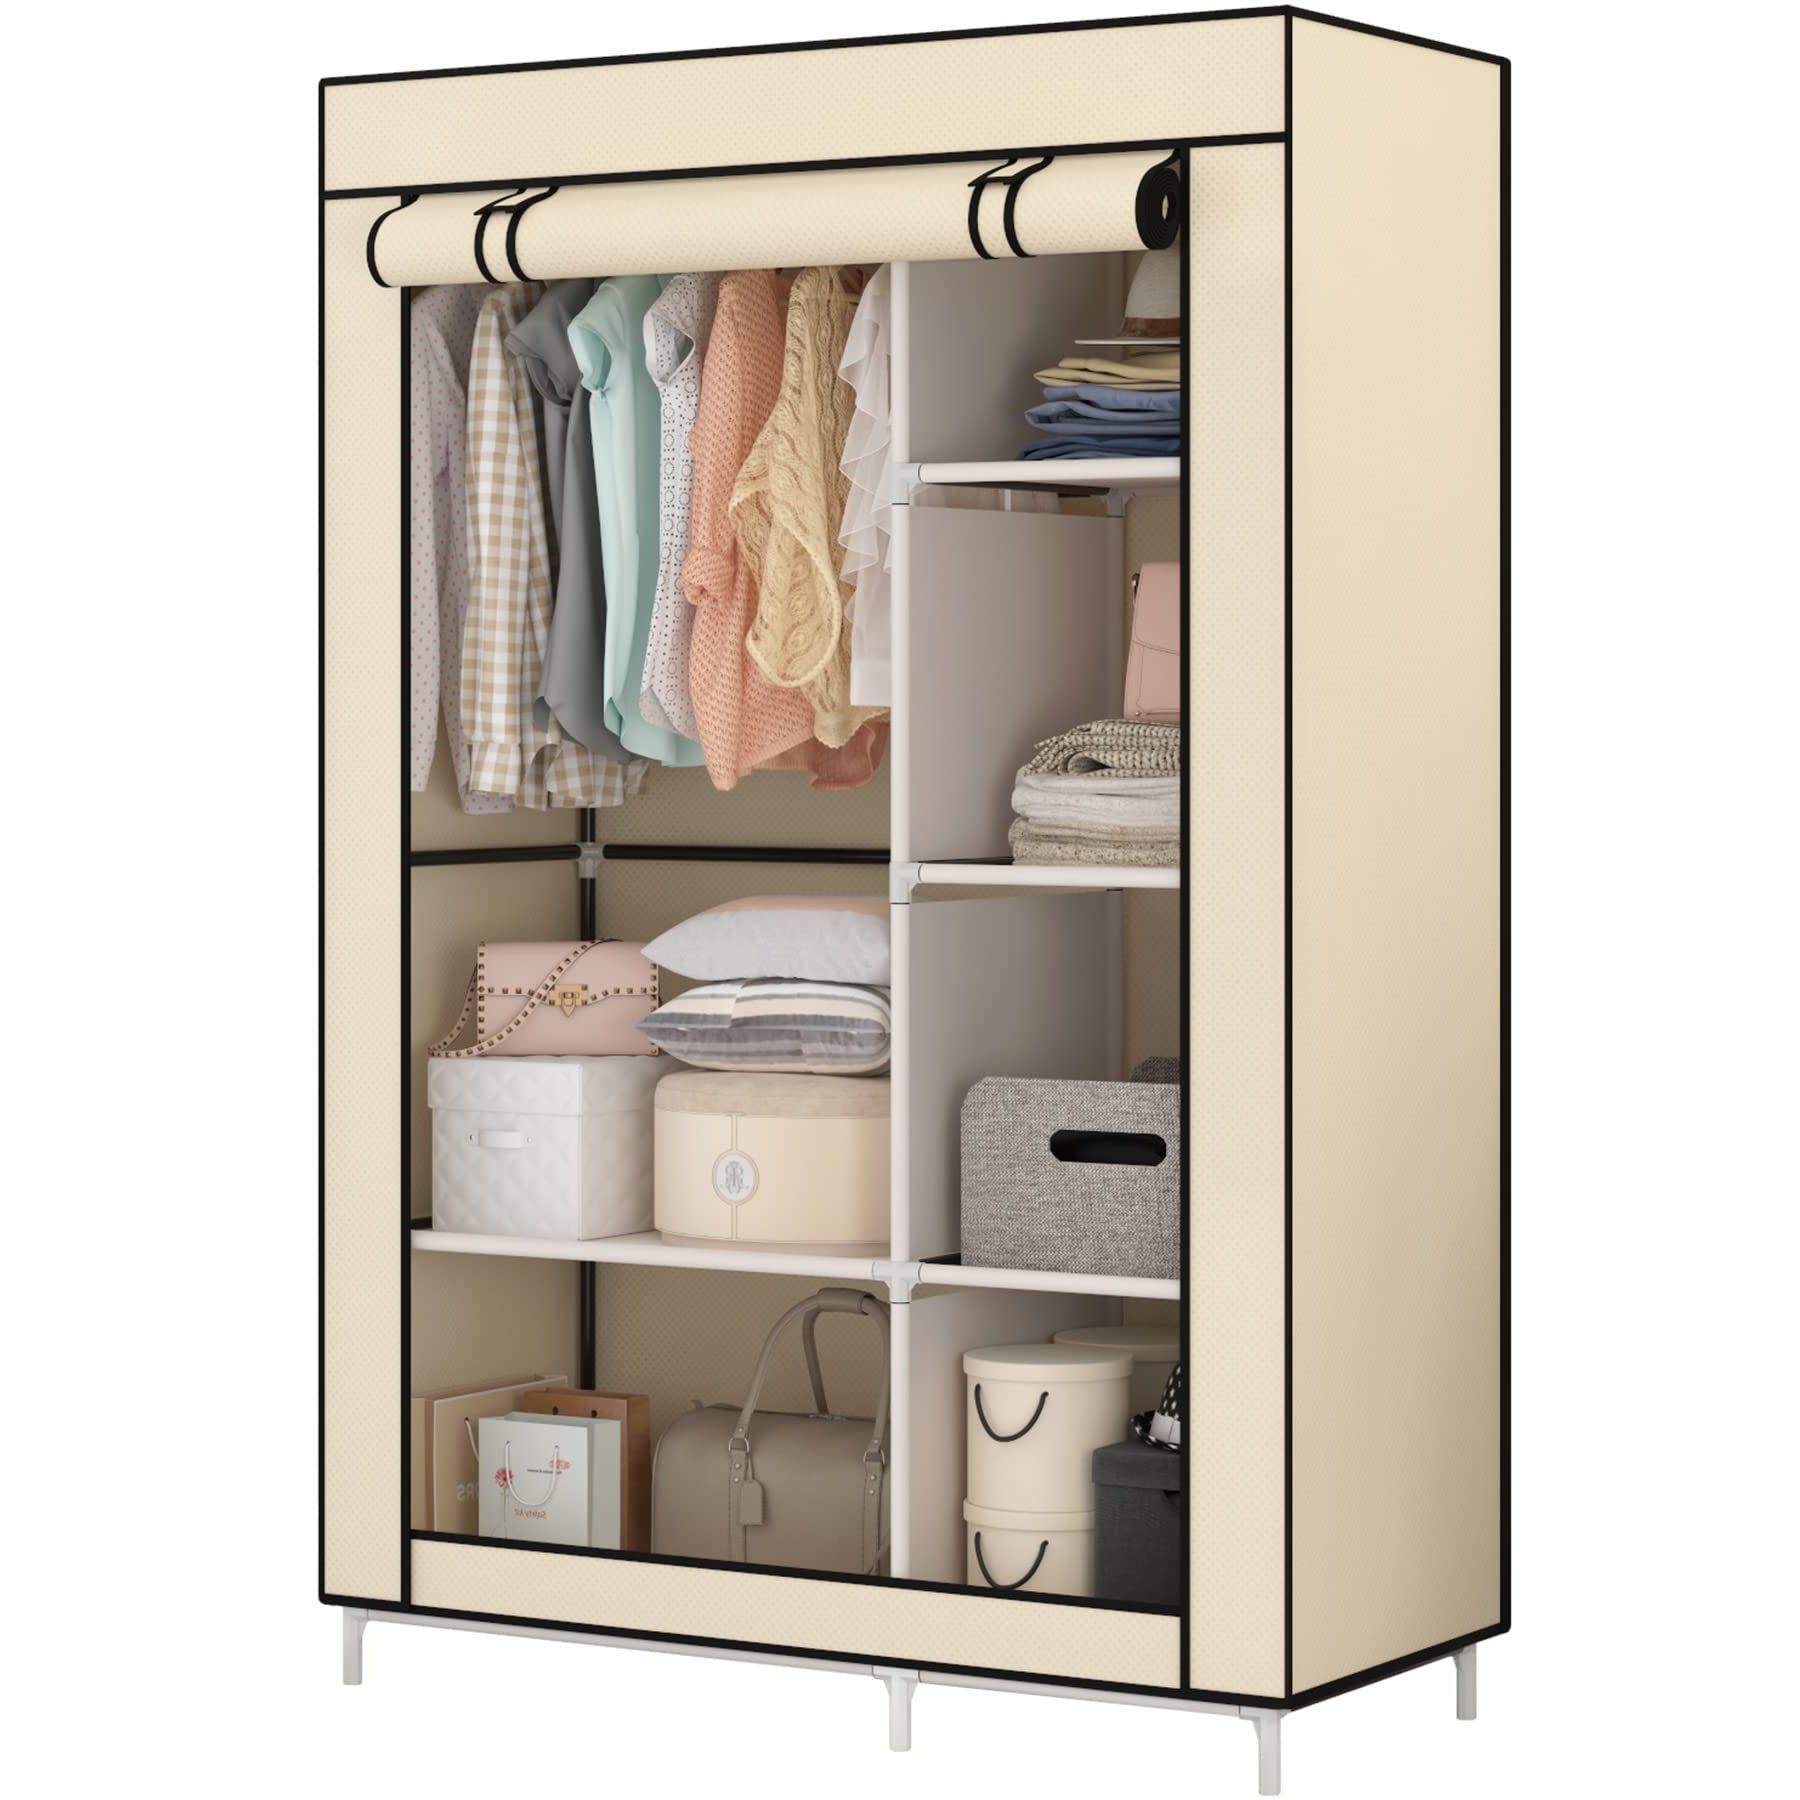 Most Recent 6 Shelf Wardrobes For Amazon: Calmootey Closet Storage Organizer,portable Wardrobe With 6  Shelves And Clothes Rod,non Woven Fabric Cover With 4 Side Pockets,beige :  Home & Kitchen (View 7 of 10)